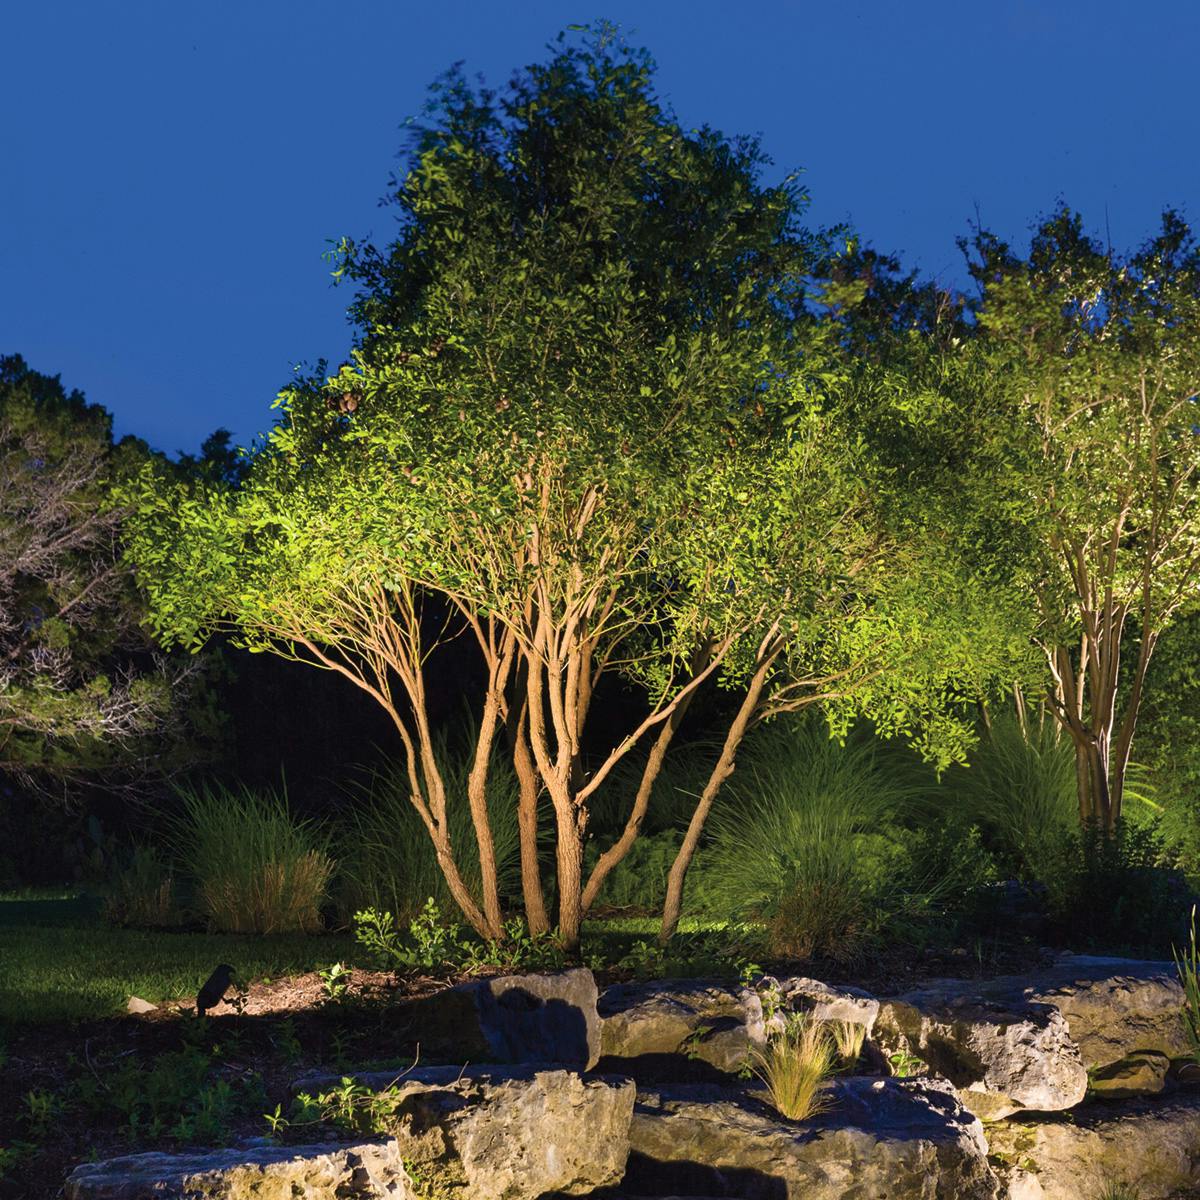 Night time backyard trees illuminated by landscape accent lights